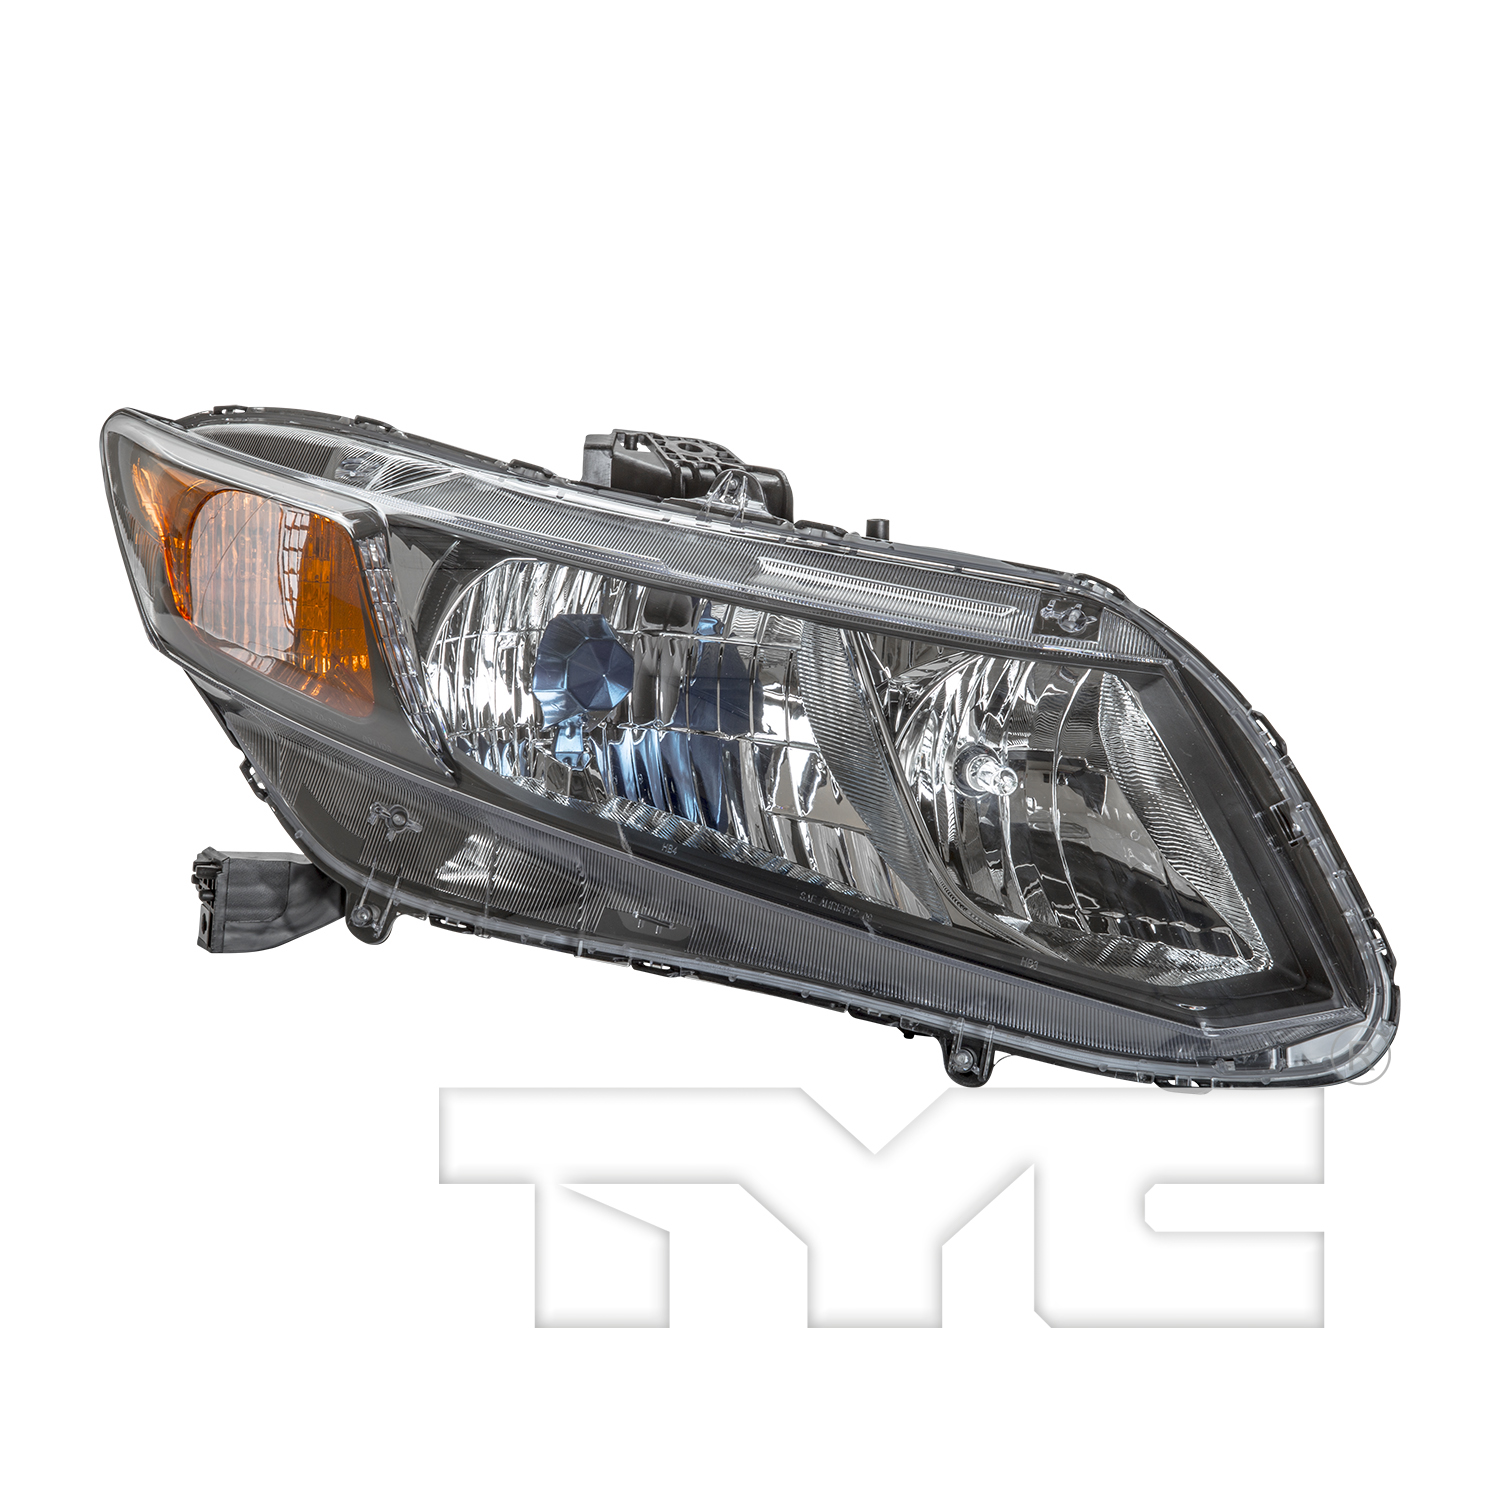 Aftermarket HEADLIGHTS for HONDA - CIVIC, CIVIC,12-12,RT Headlamp assy composite